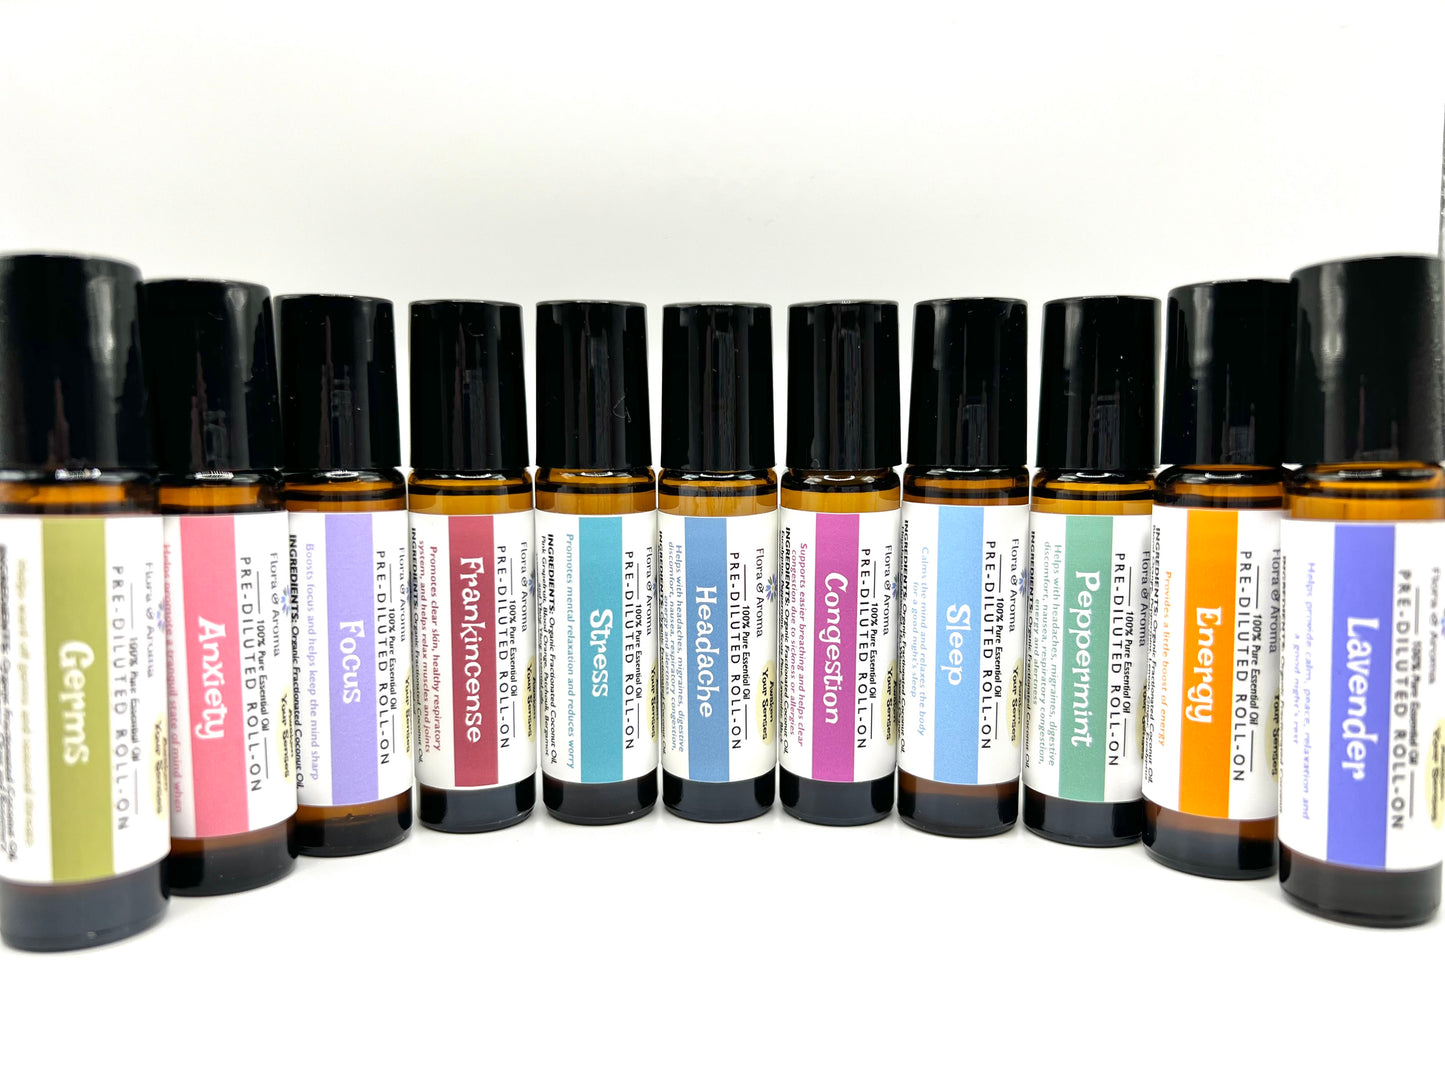 Sleep Essential Oil Pre-Diluted Roll-On